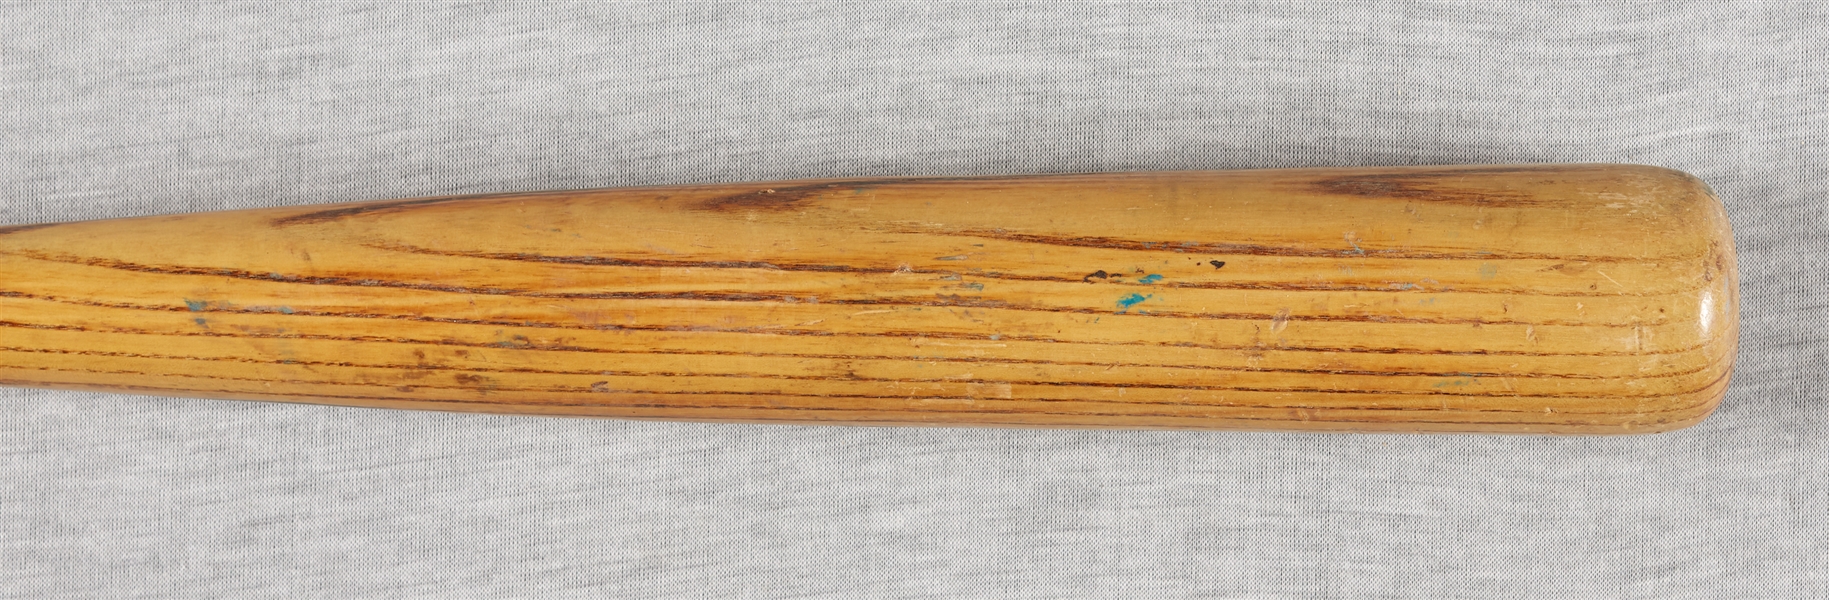 Cecil Fielder Game-Used & Signed Cooper Bat (BAS)